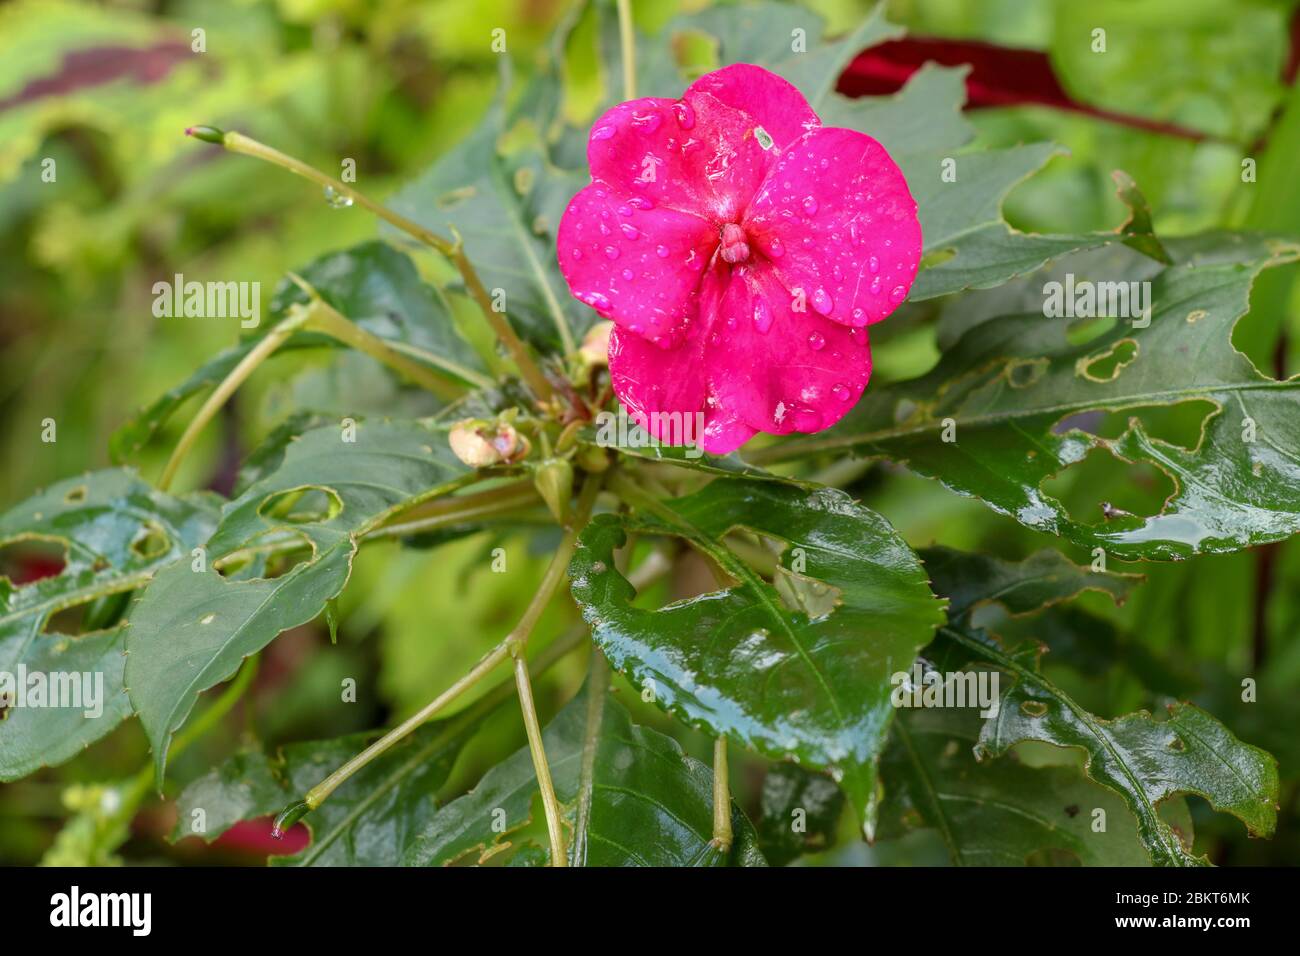 Close up of Impatiens balsamina, water drops on petal surface. Garden balsam, Rose balsam, Touch-me-not flowers. Blooming pink flower. Macro of bright Stock Photo